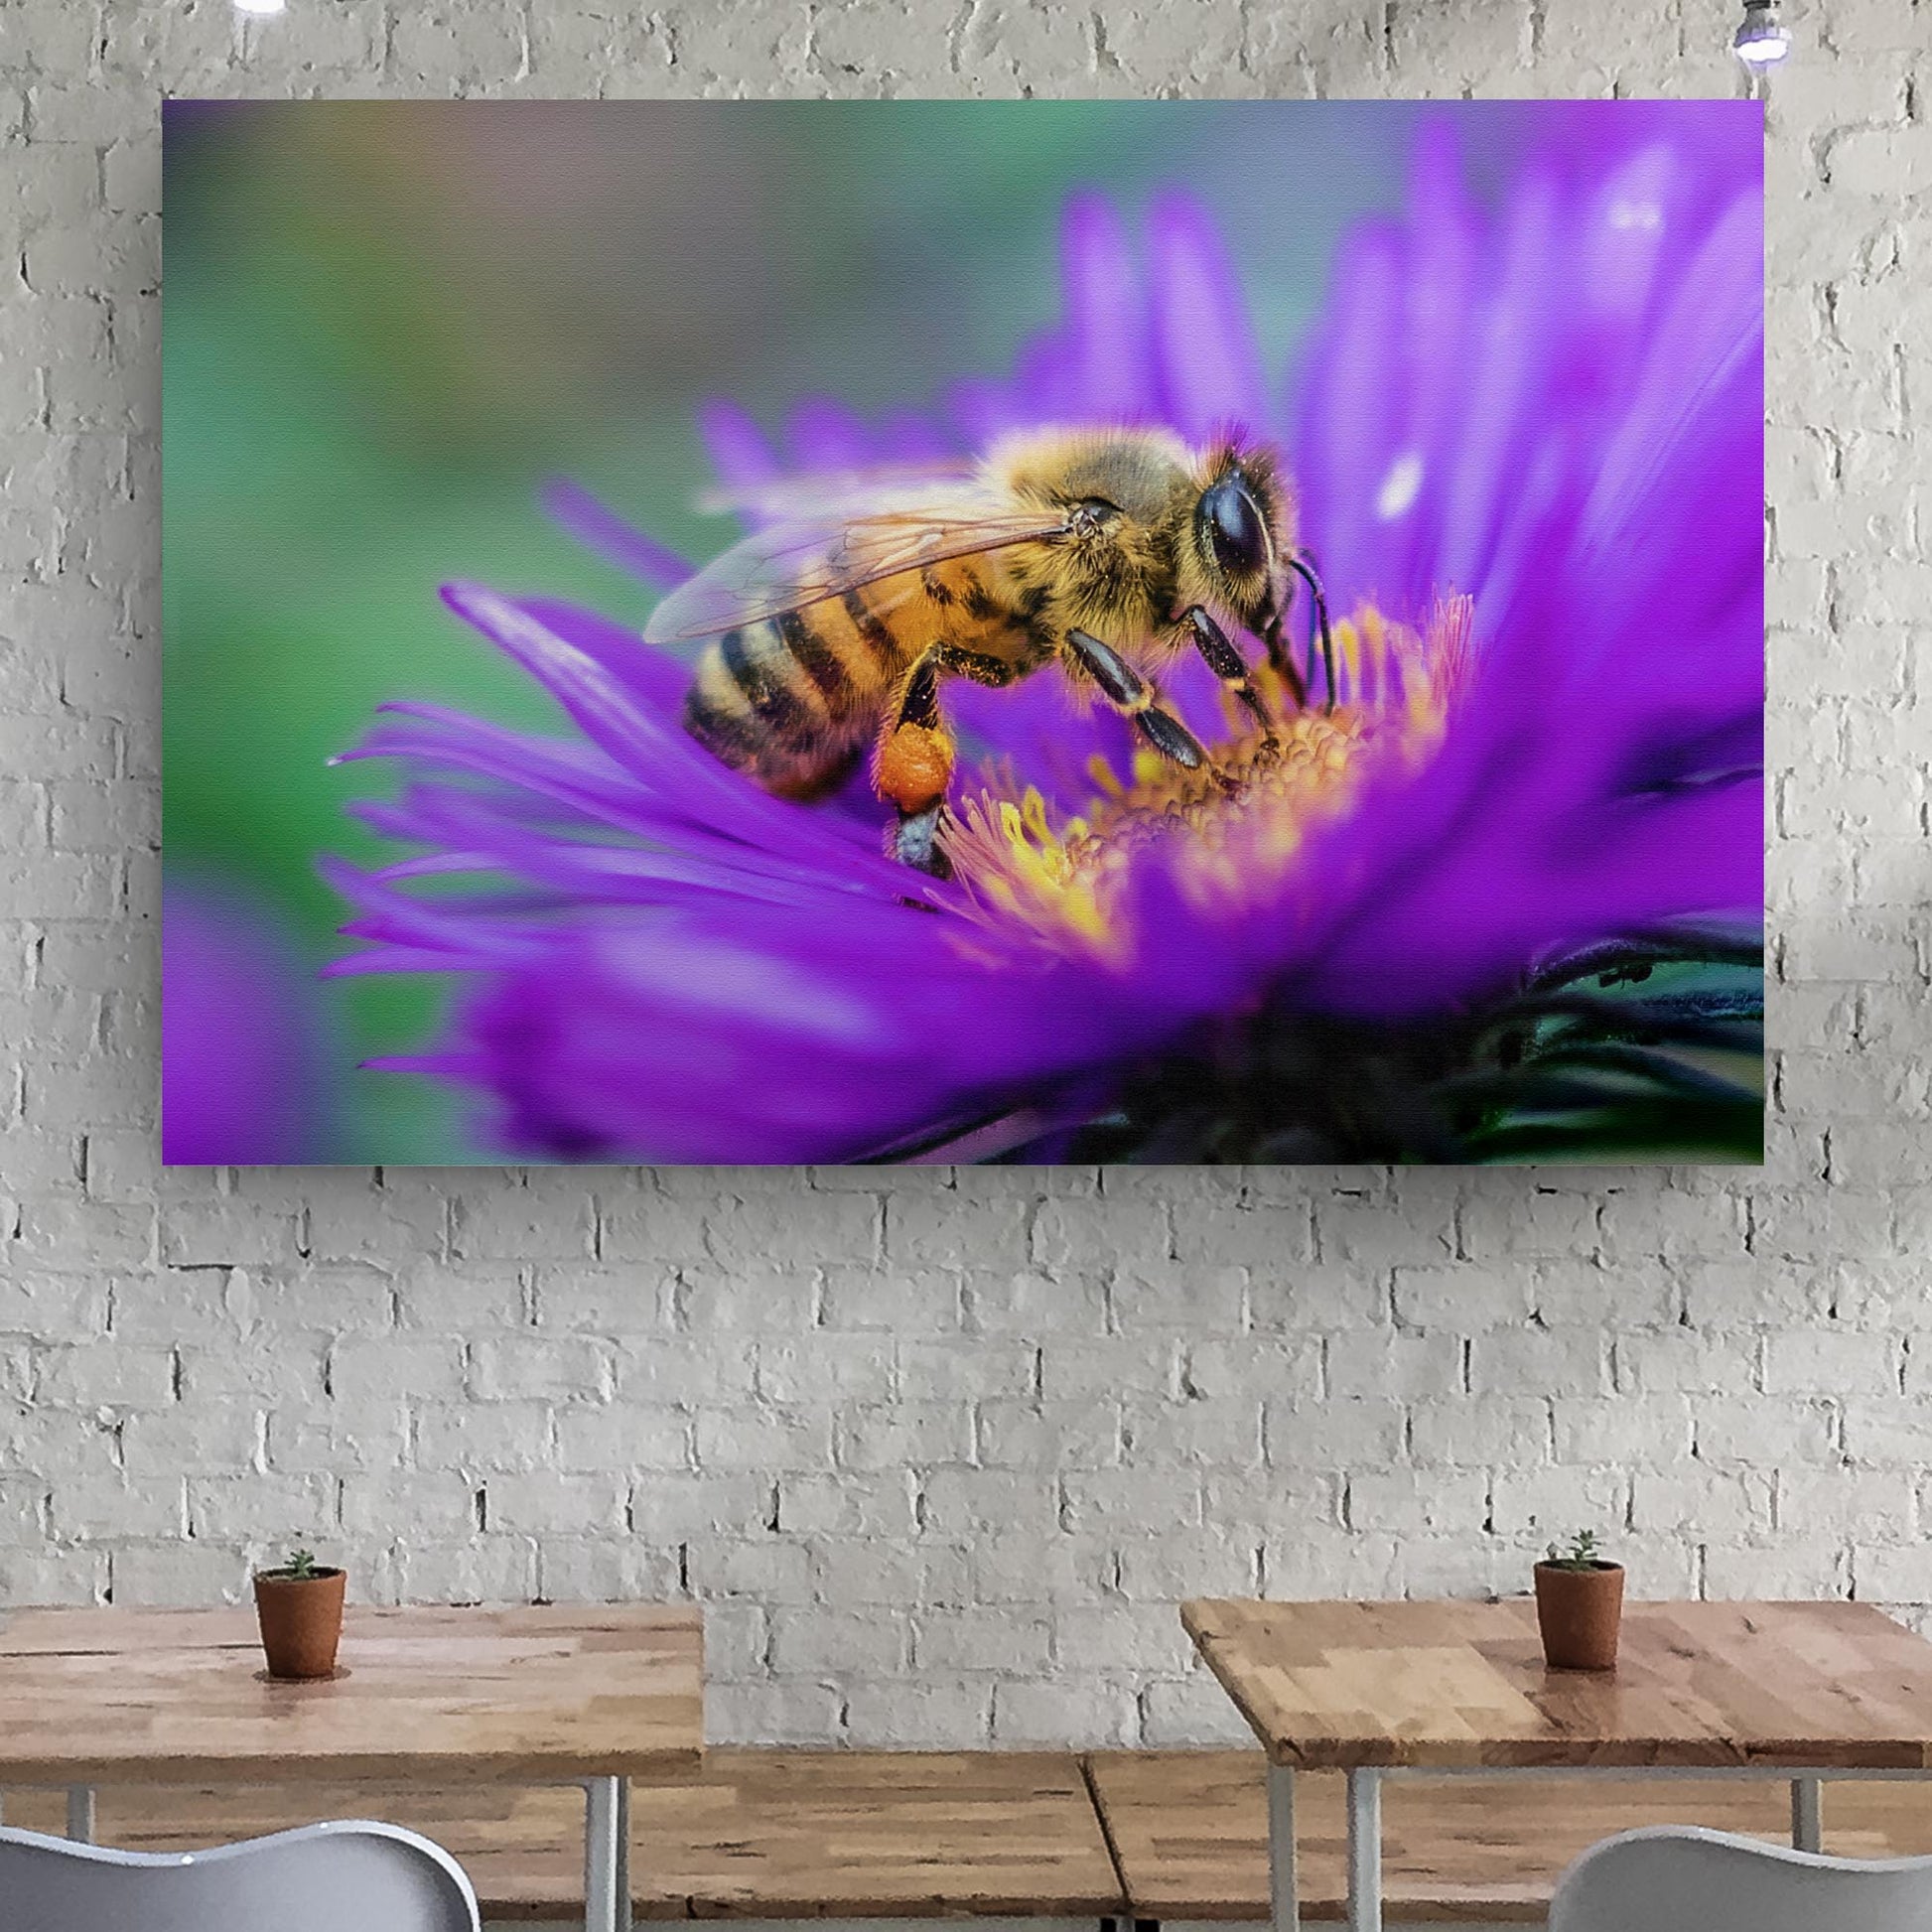 Honey Bee Up Close Canvas Wall Art - Image by Tailored Canvases